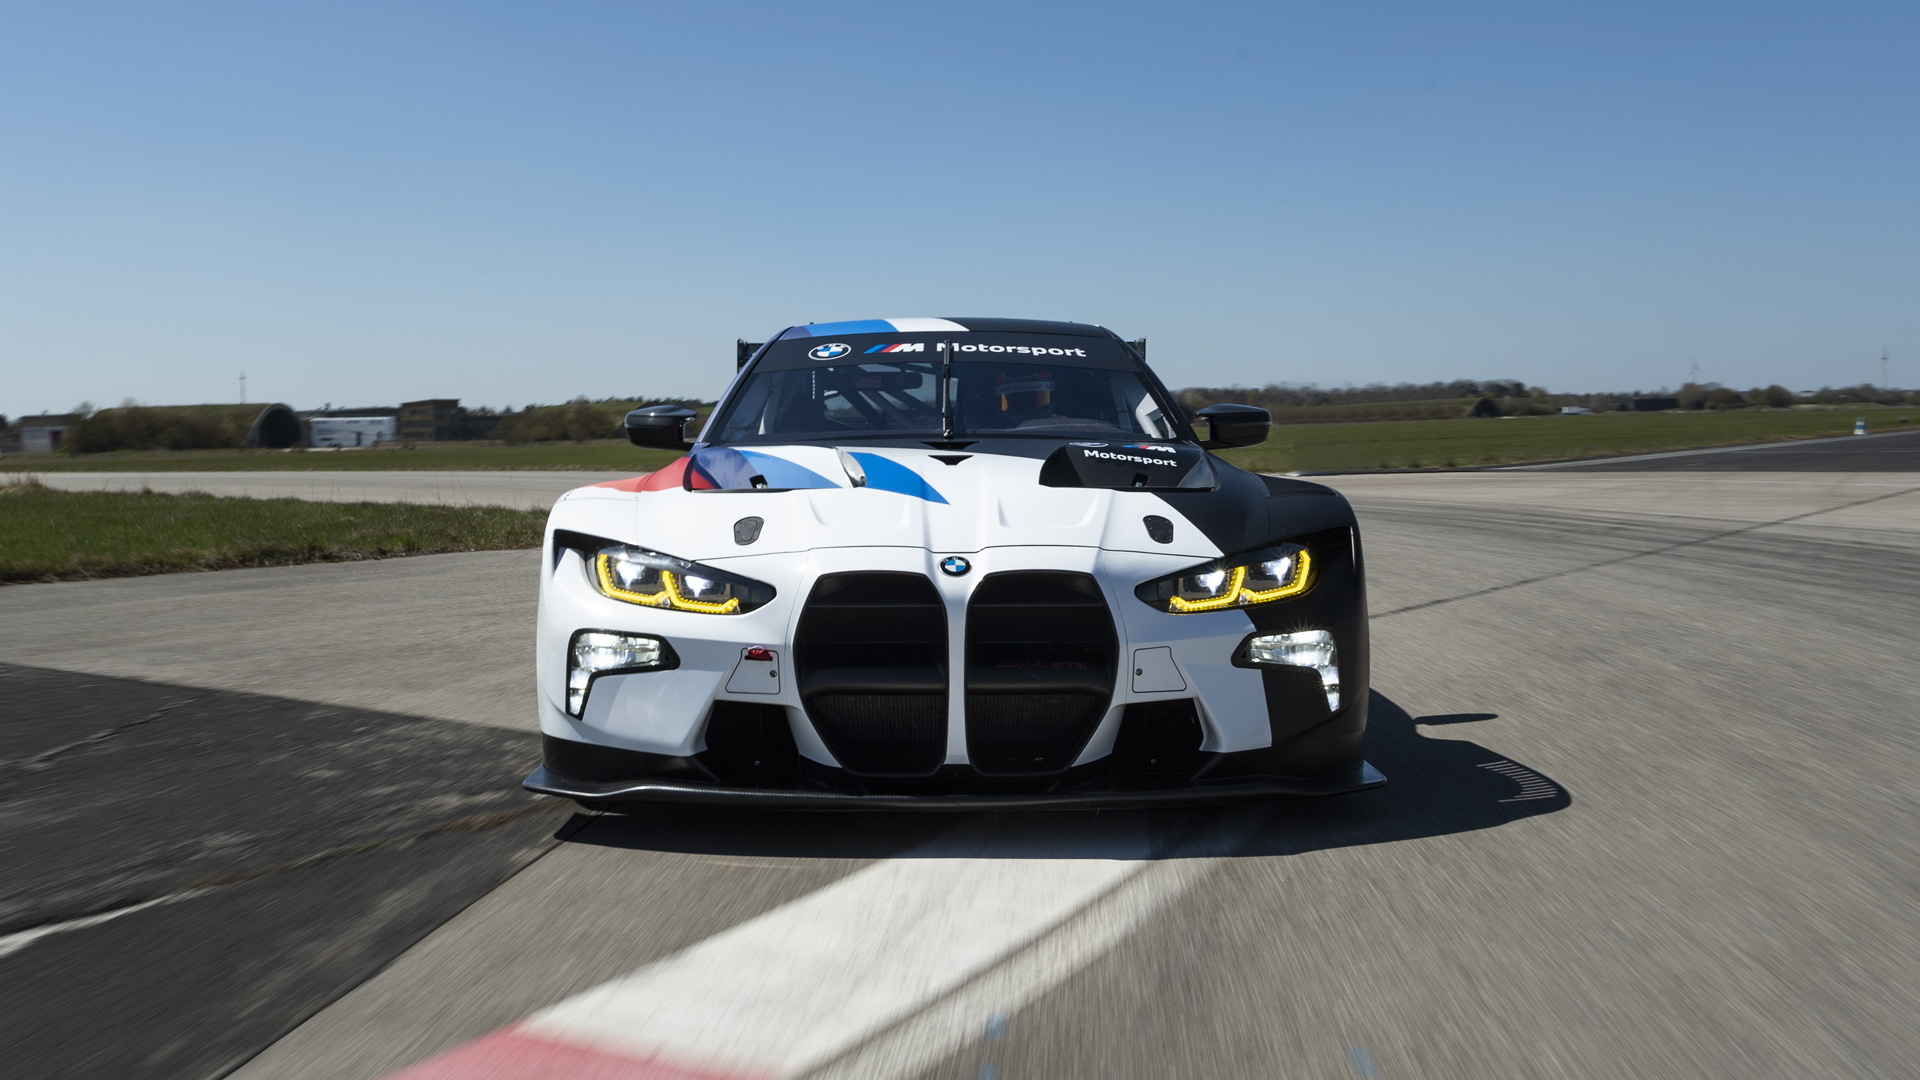 2022 BMW M4 GT3 customer race car ready to hit the track